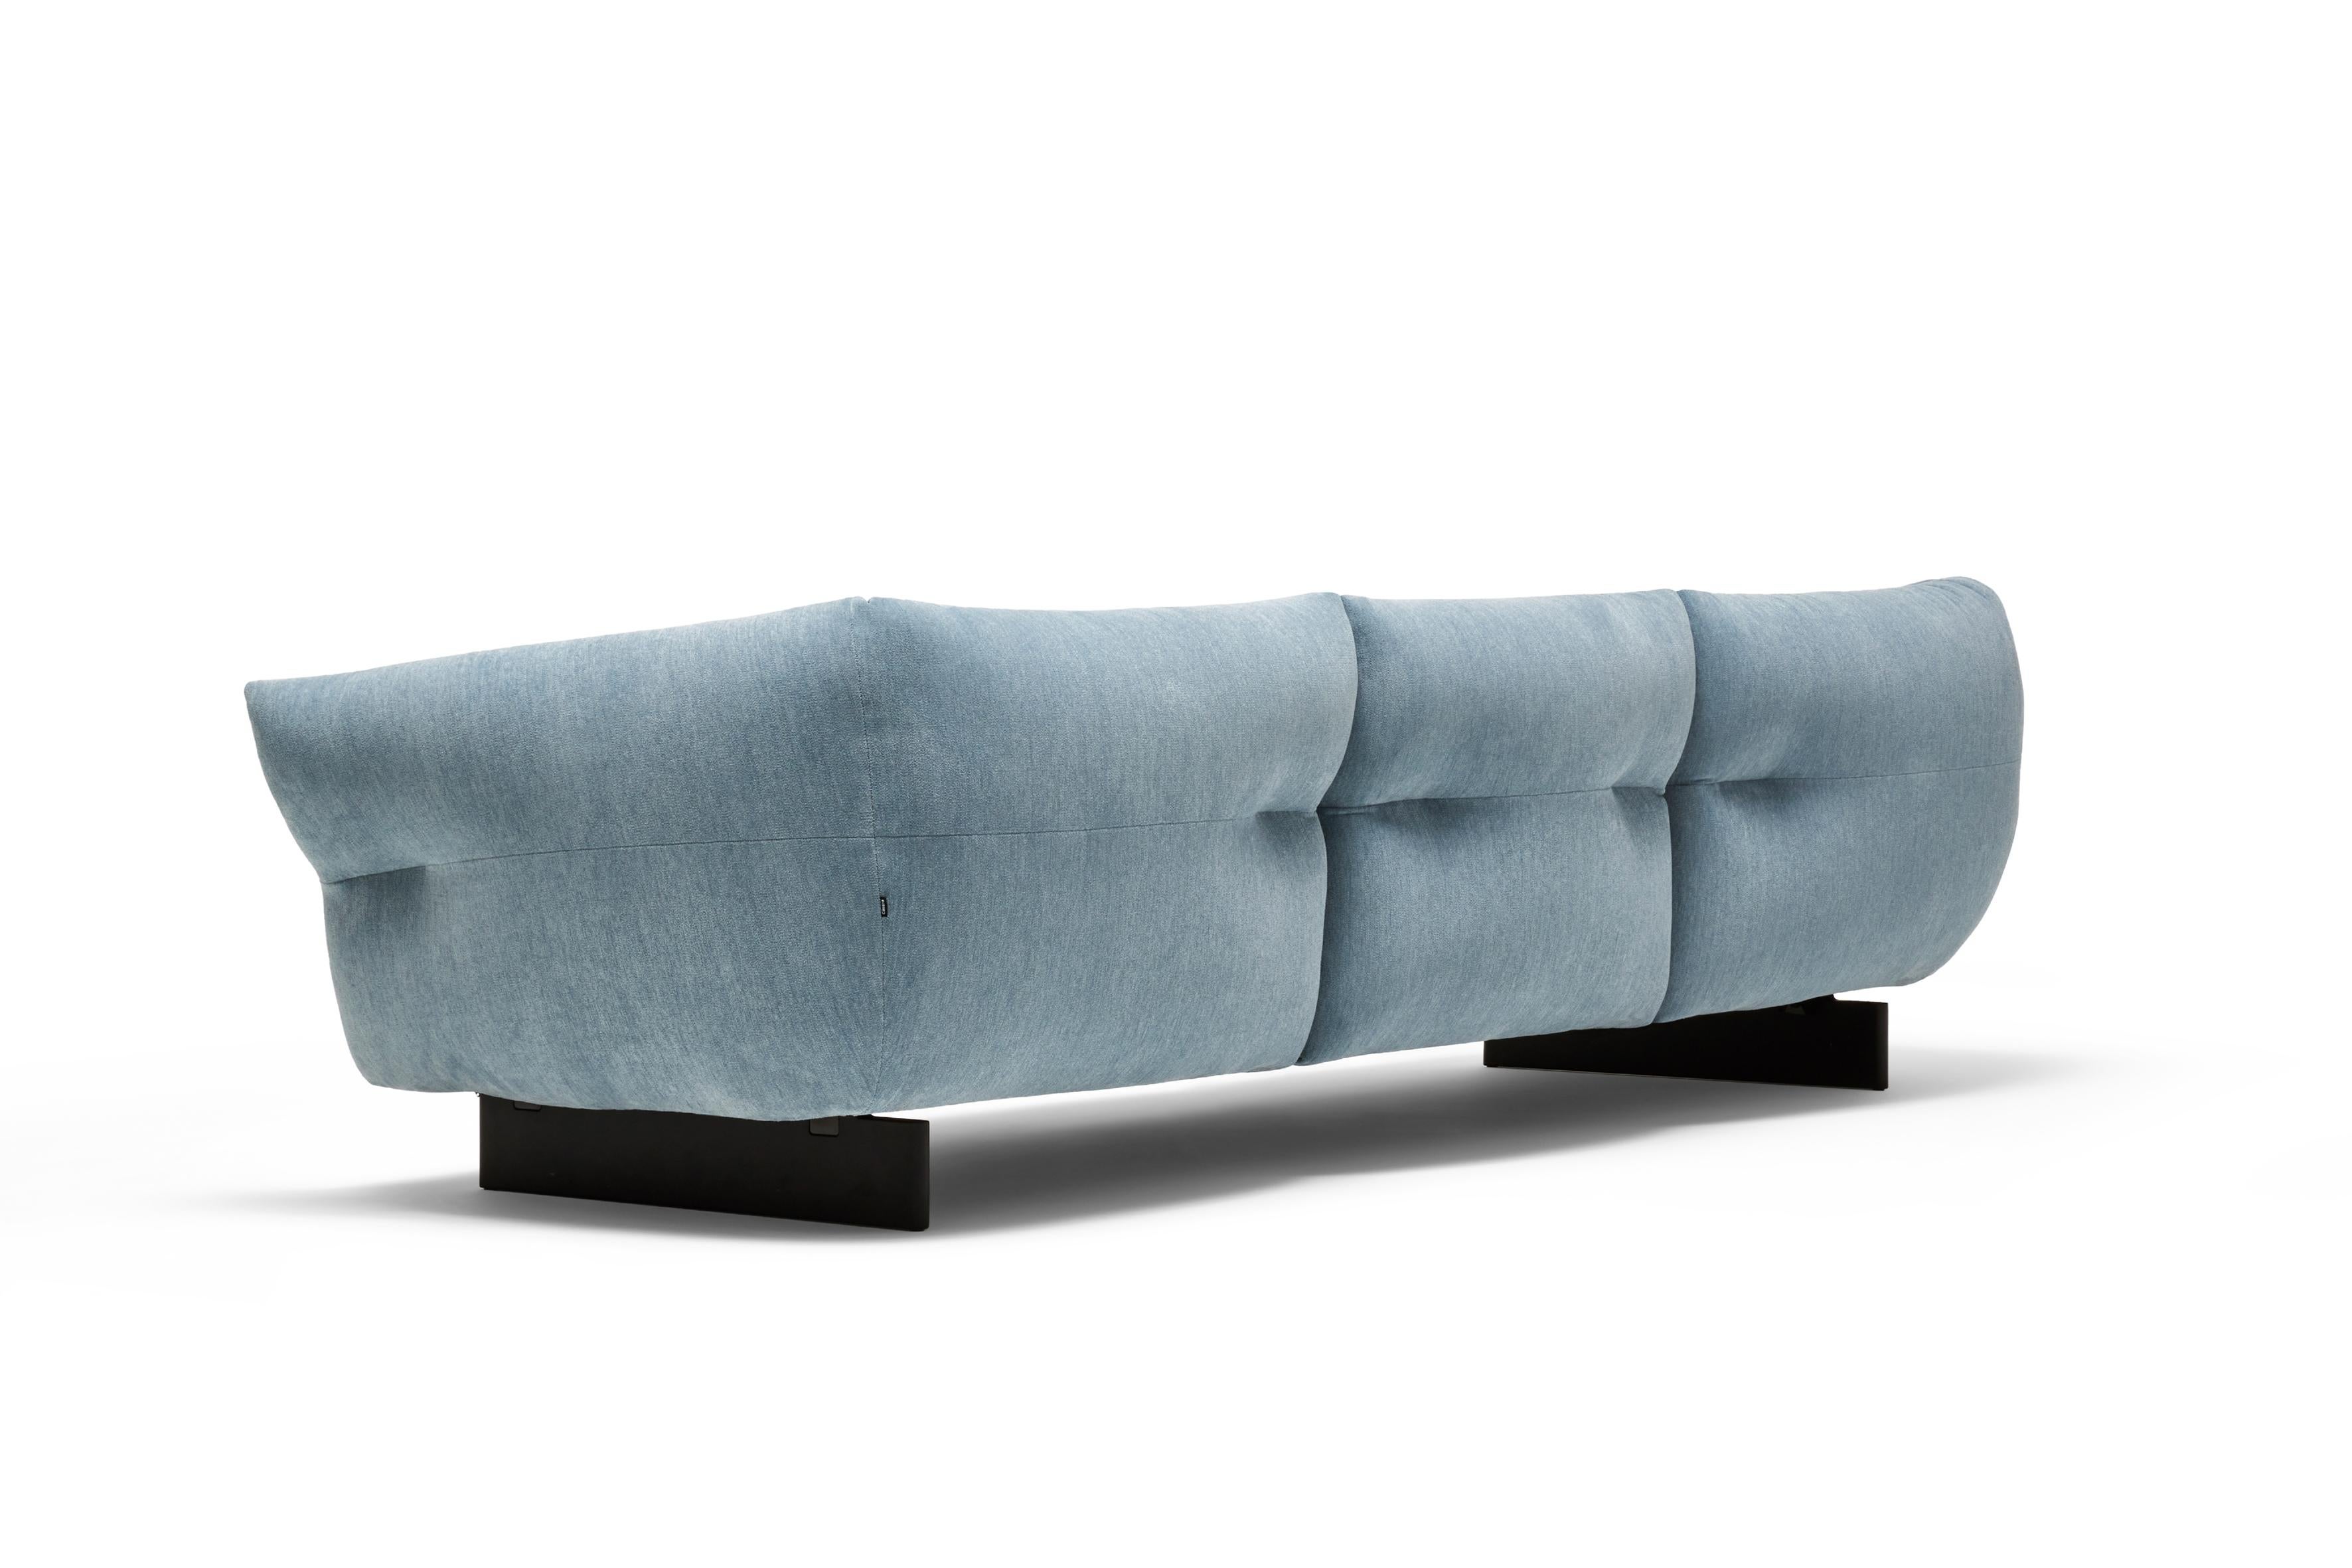 Moncloud Sofa designed by Patricia Urquiola.
Manufactured by Cassina (Italy)

THE FUTURE IN A SOFA
A generous, welcoming refuge that celebrates comfort and hospitality.

Designed by Patricia Urquiola, Moncloud is an extremely elegant, versatile